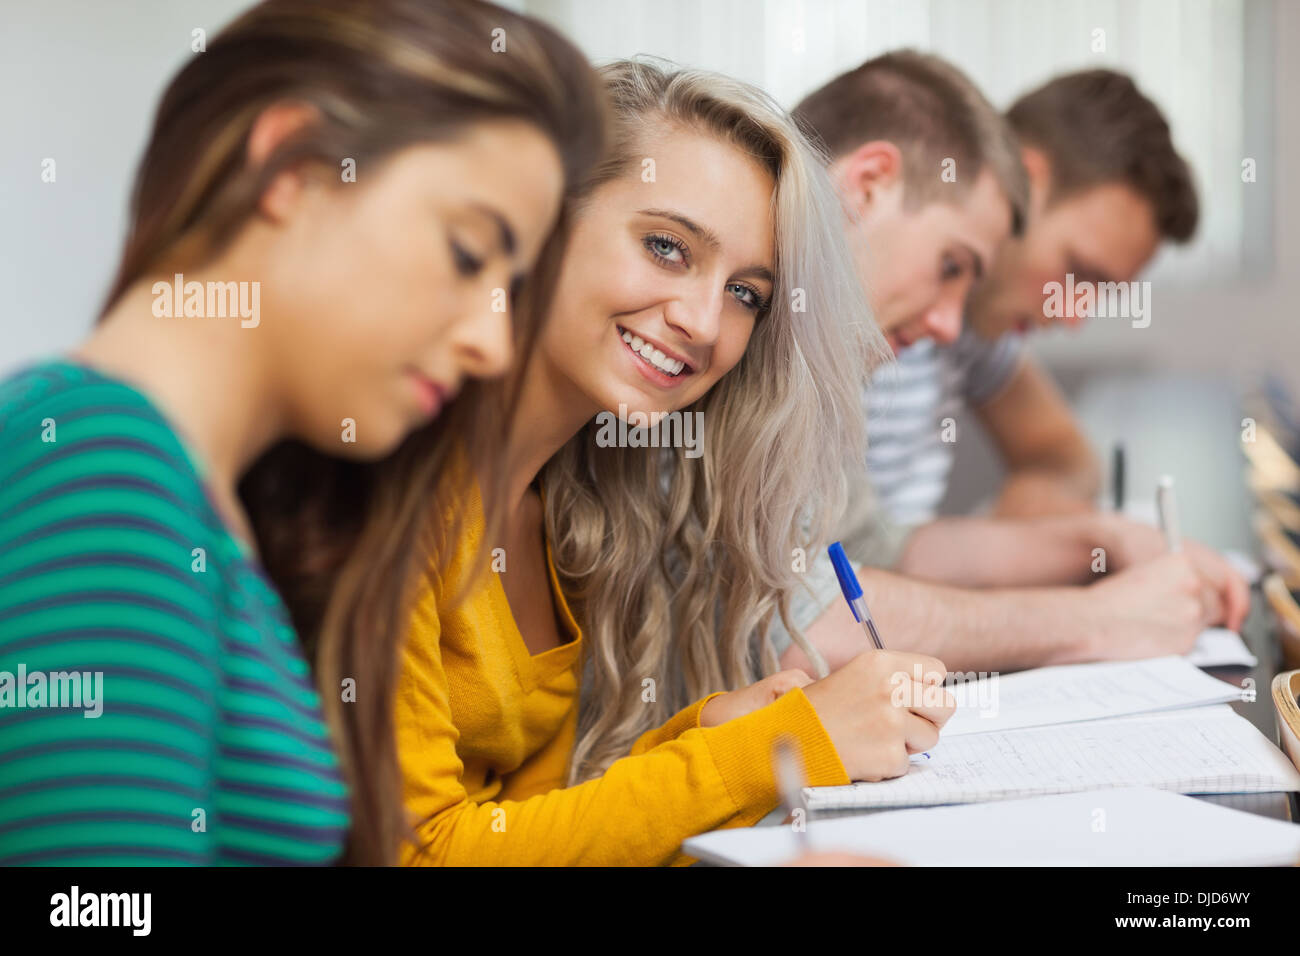 Smiling blonde student looking at camera Stock Photo